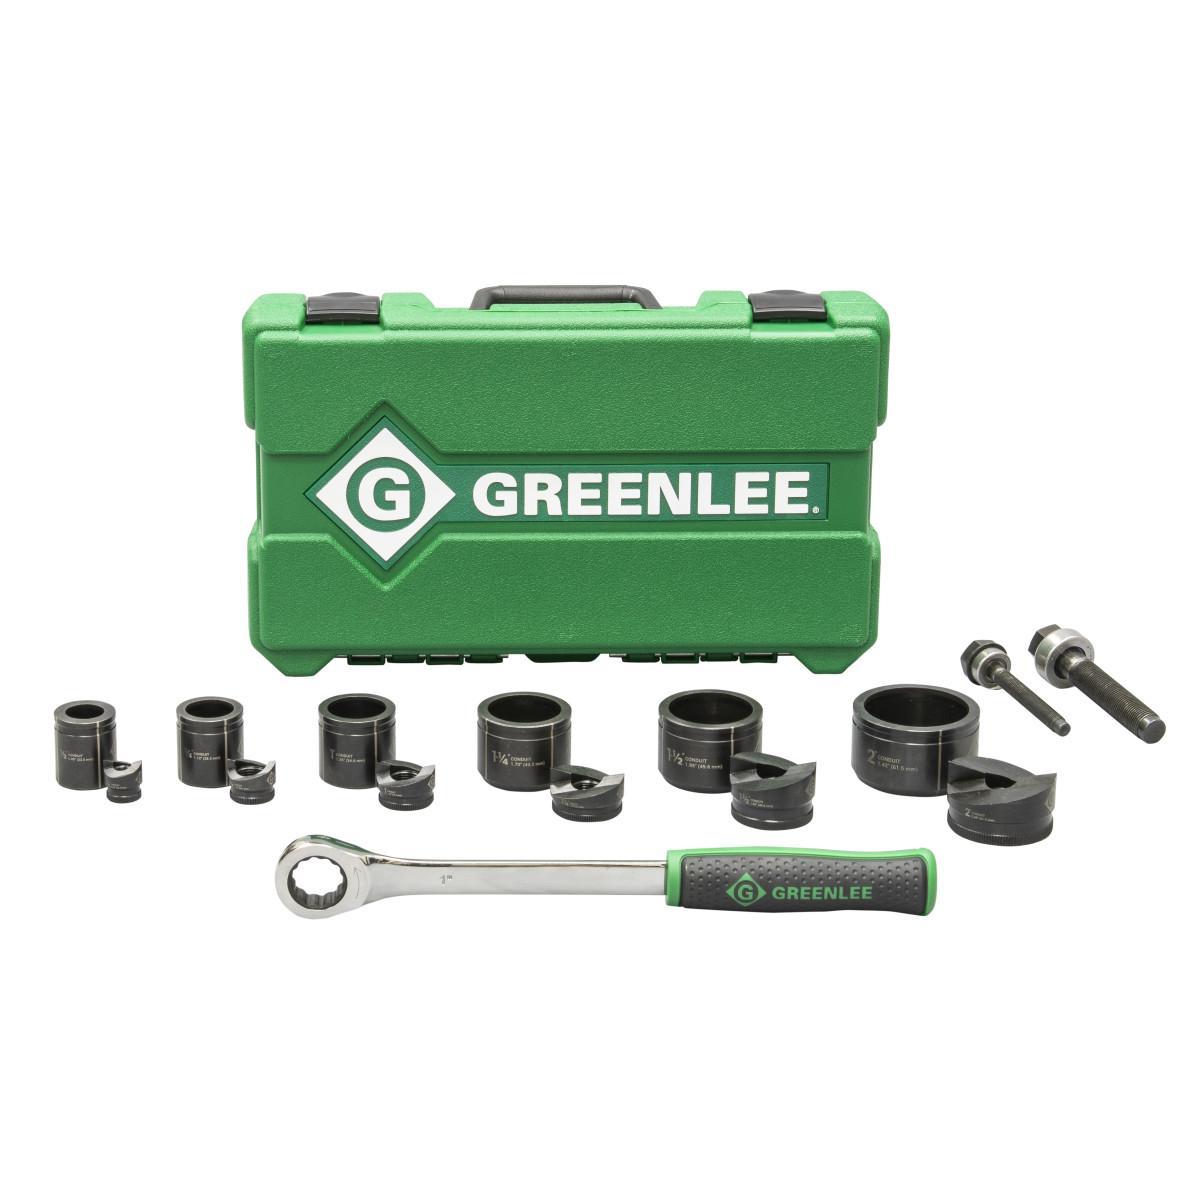 Greenlee® Slug-Buster® 7235BB Manual Knockout Punch Die Kit, 10 ga Capacity, For Use With Battery Powered, Hydraulic Ratchet Driver and Greenlee® KRW-1 High Leverage Ratchet Wrench, 1/2 to 1-1/4 in Conduit/Pipe, Mild Steel